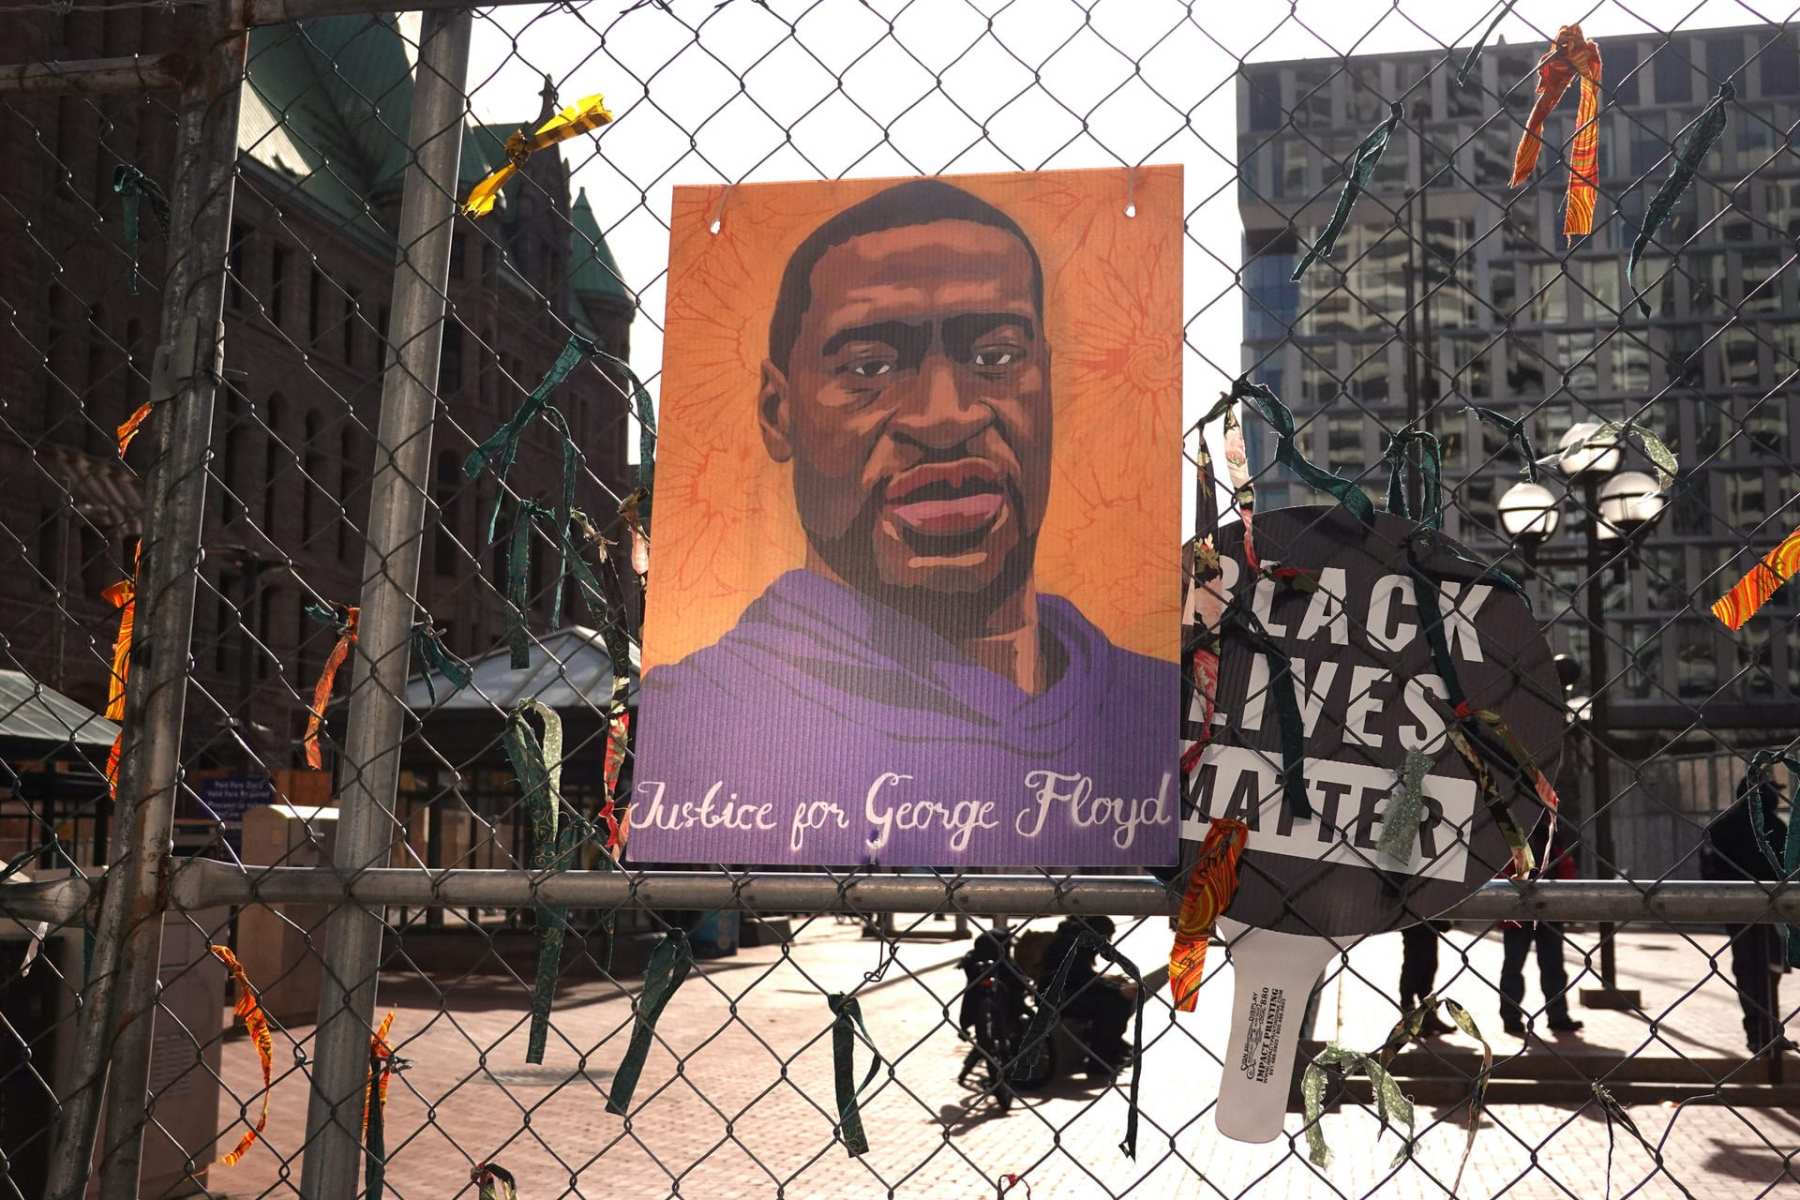 A illustration of George Floyd hangs on fencing next to a sign that reads "Black Lives Matter."